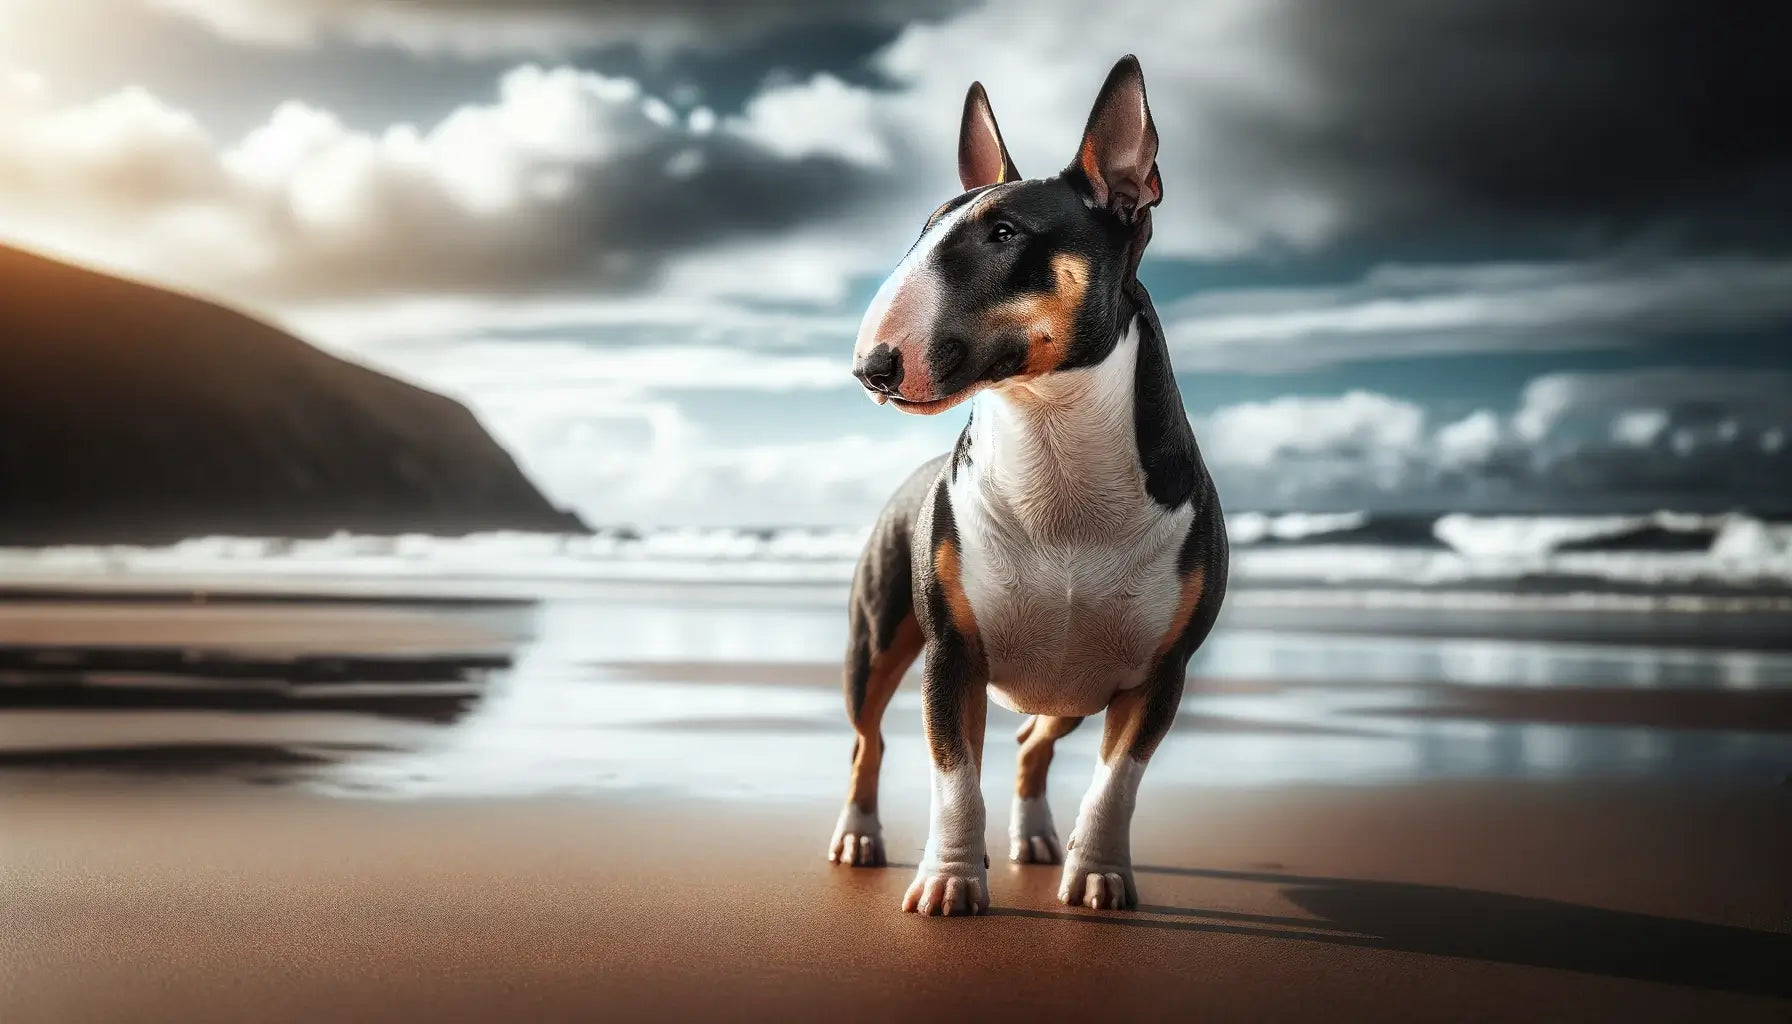 A Bull Terrier standing on a beach with the vast ocean in the background.